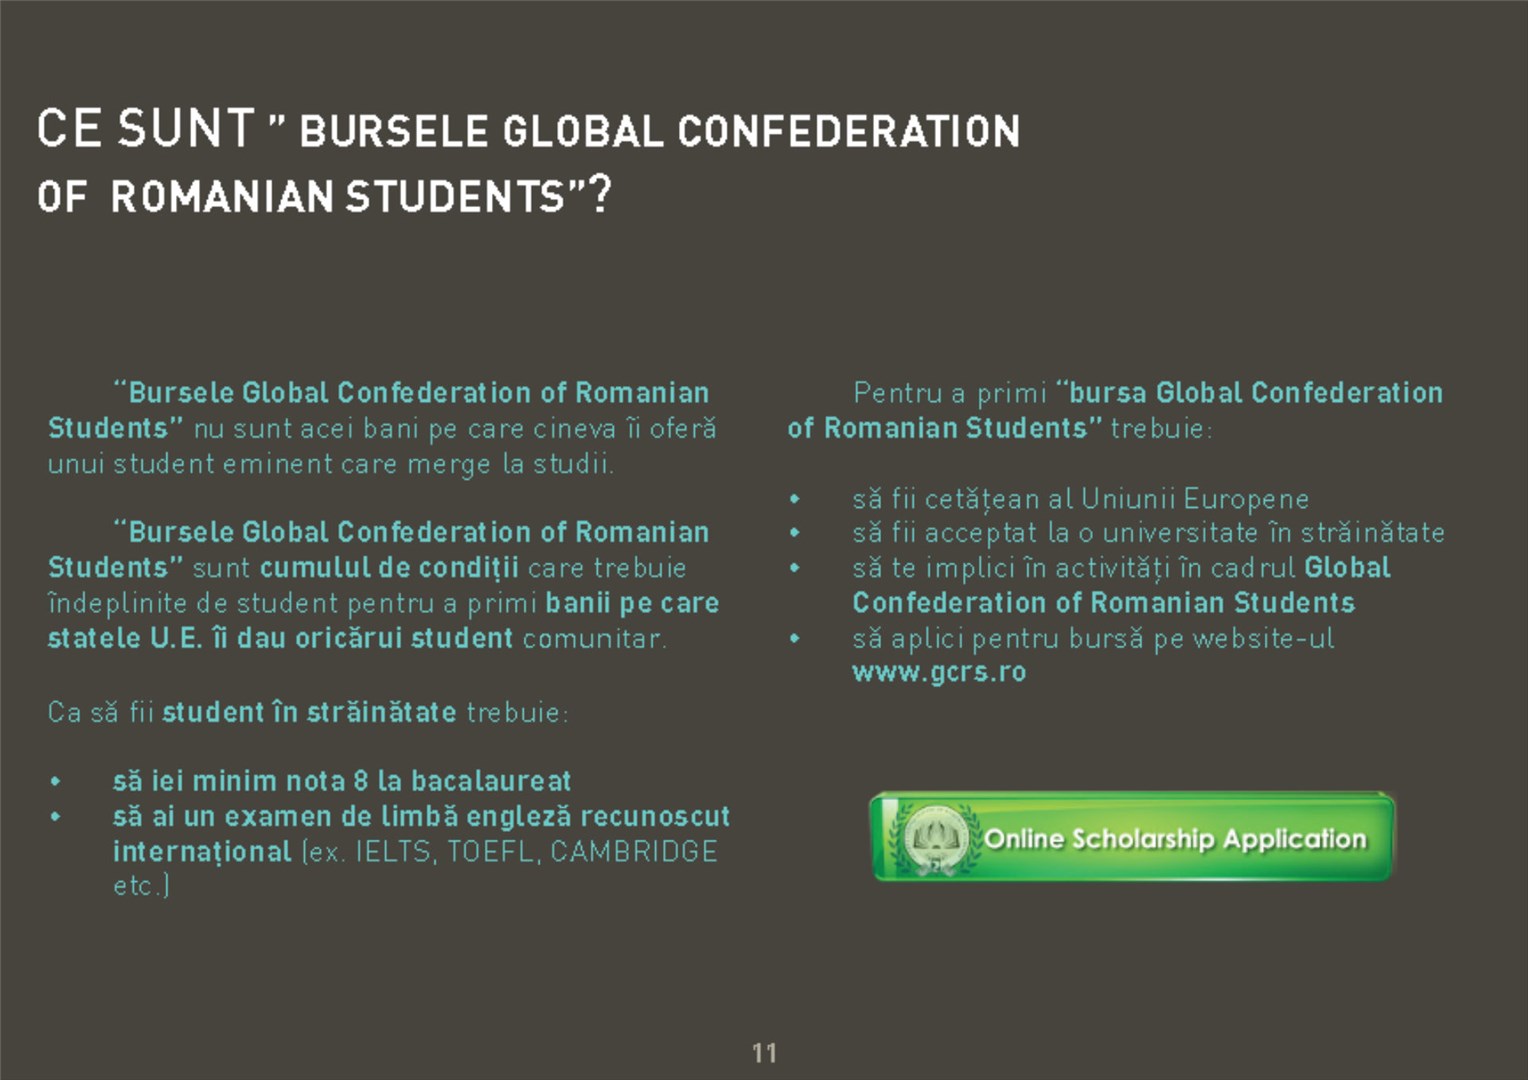 Global Confederation of Romanian Students